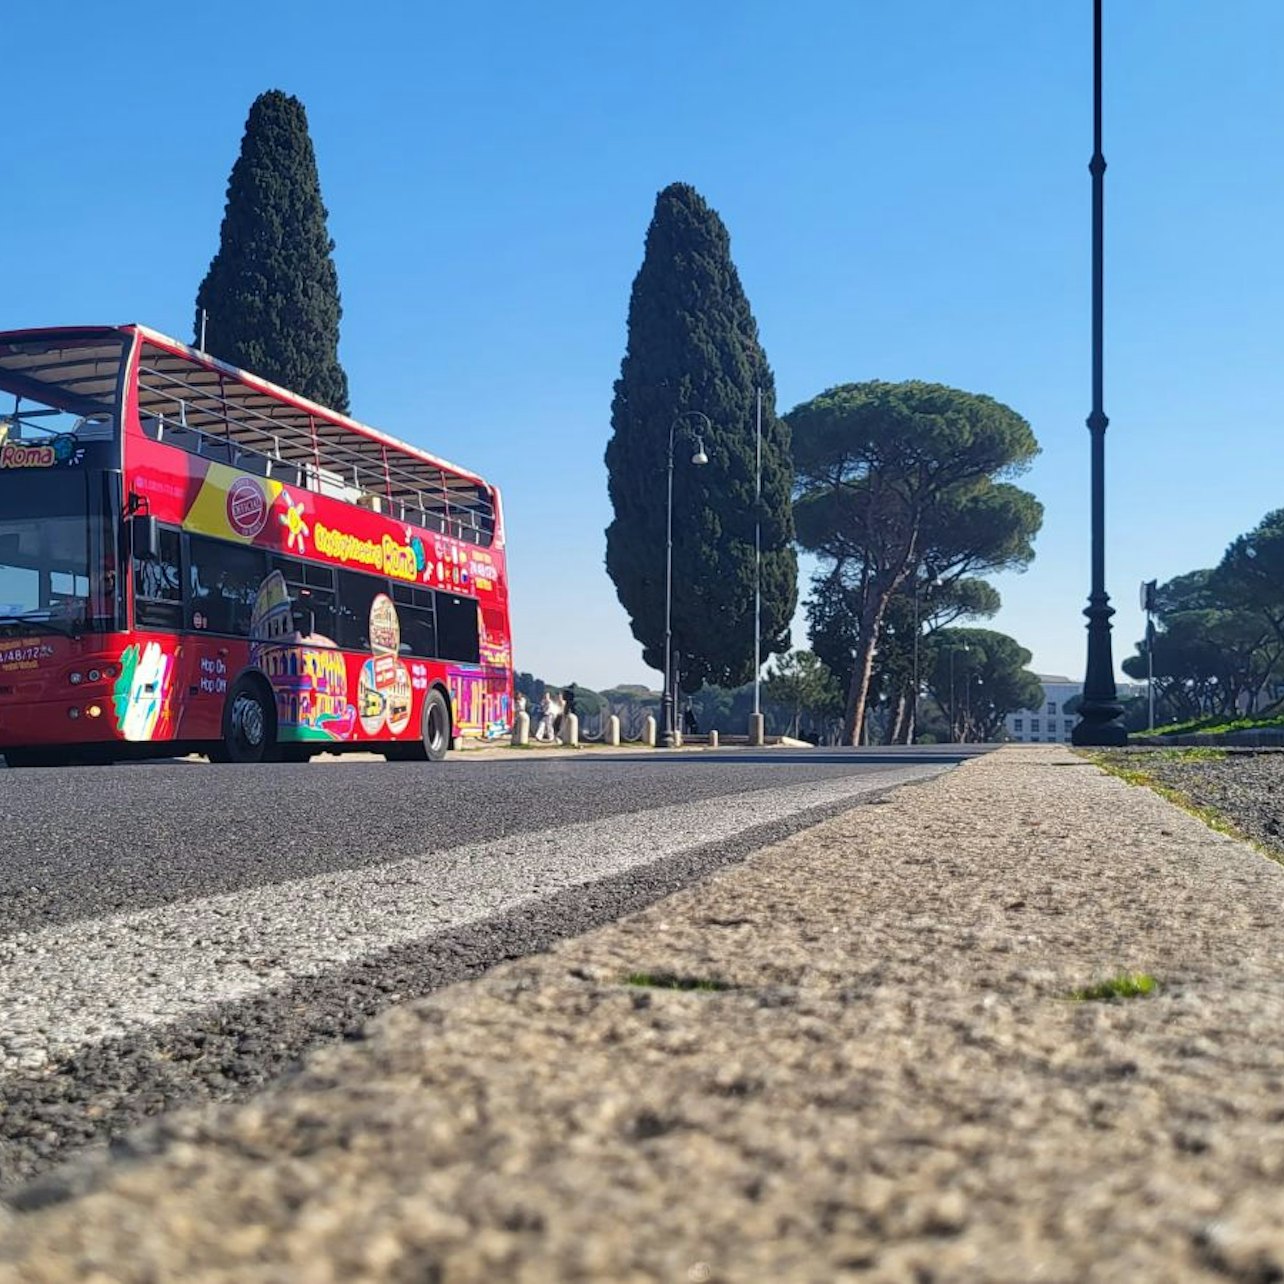 City Sightseeing Rome: Hop-on Hop-off Open Bus Tour - Accommodations in Rome